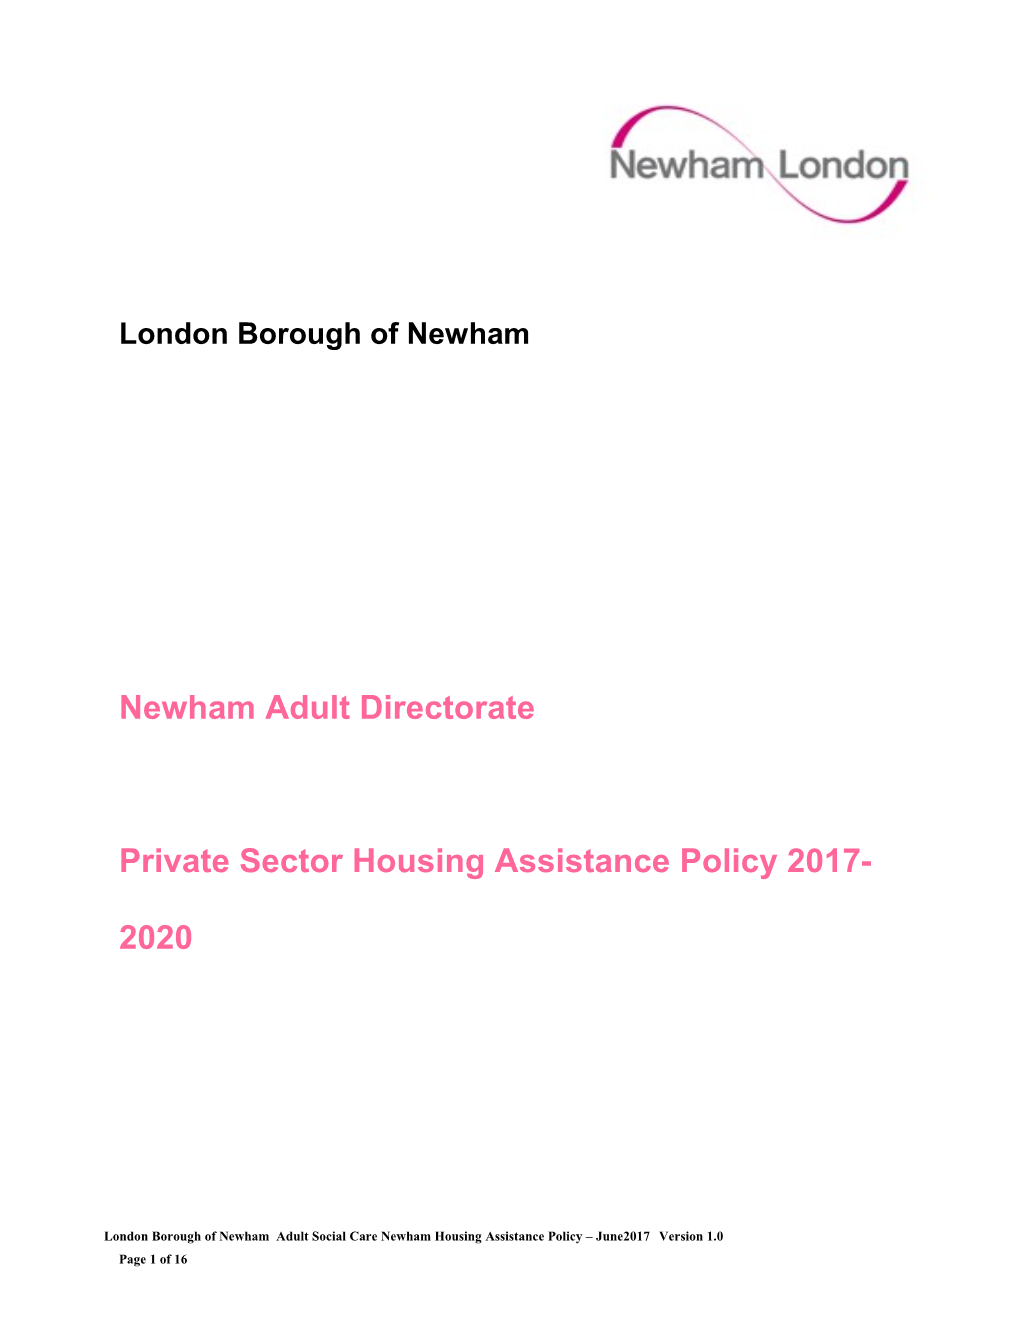 Private Sector Housing Assistance Policy 2017-2020